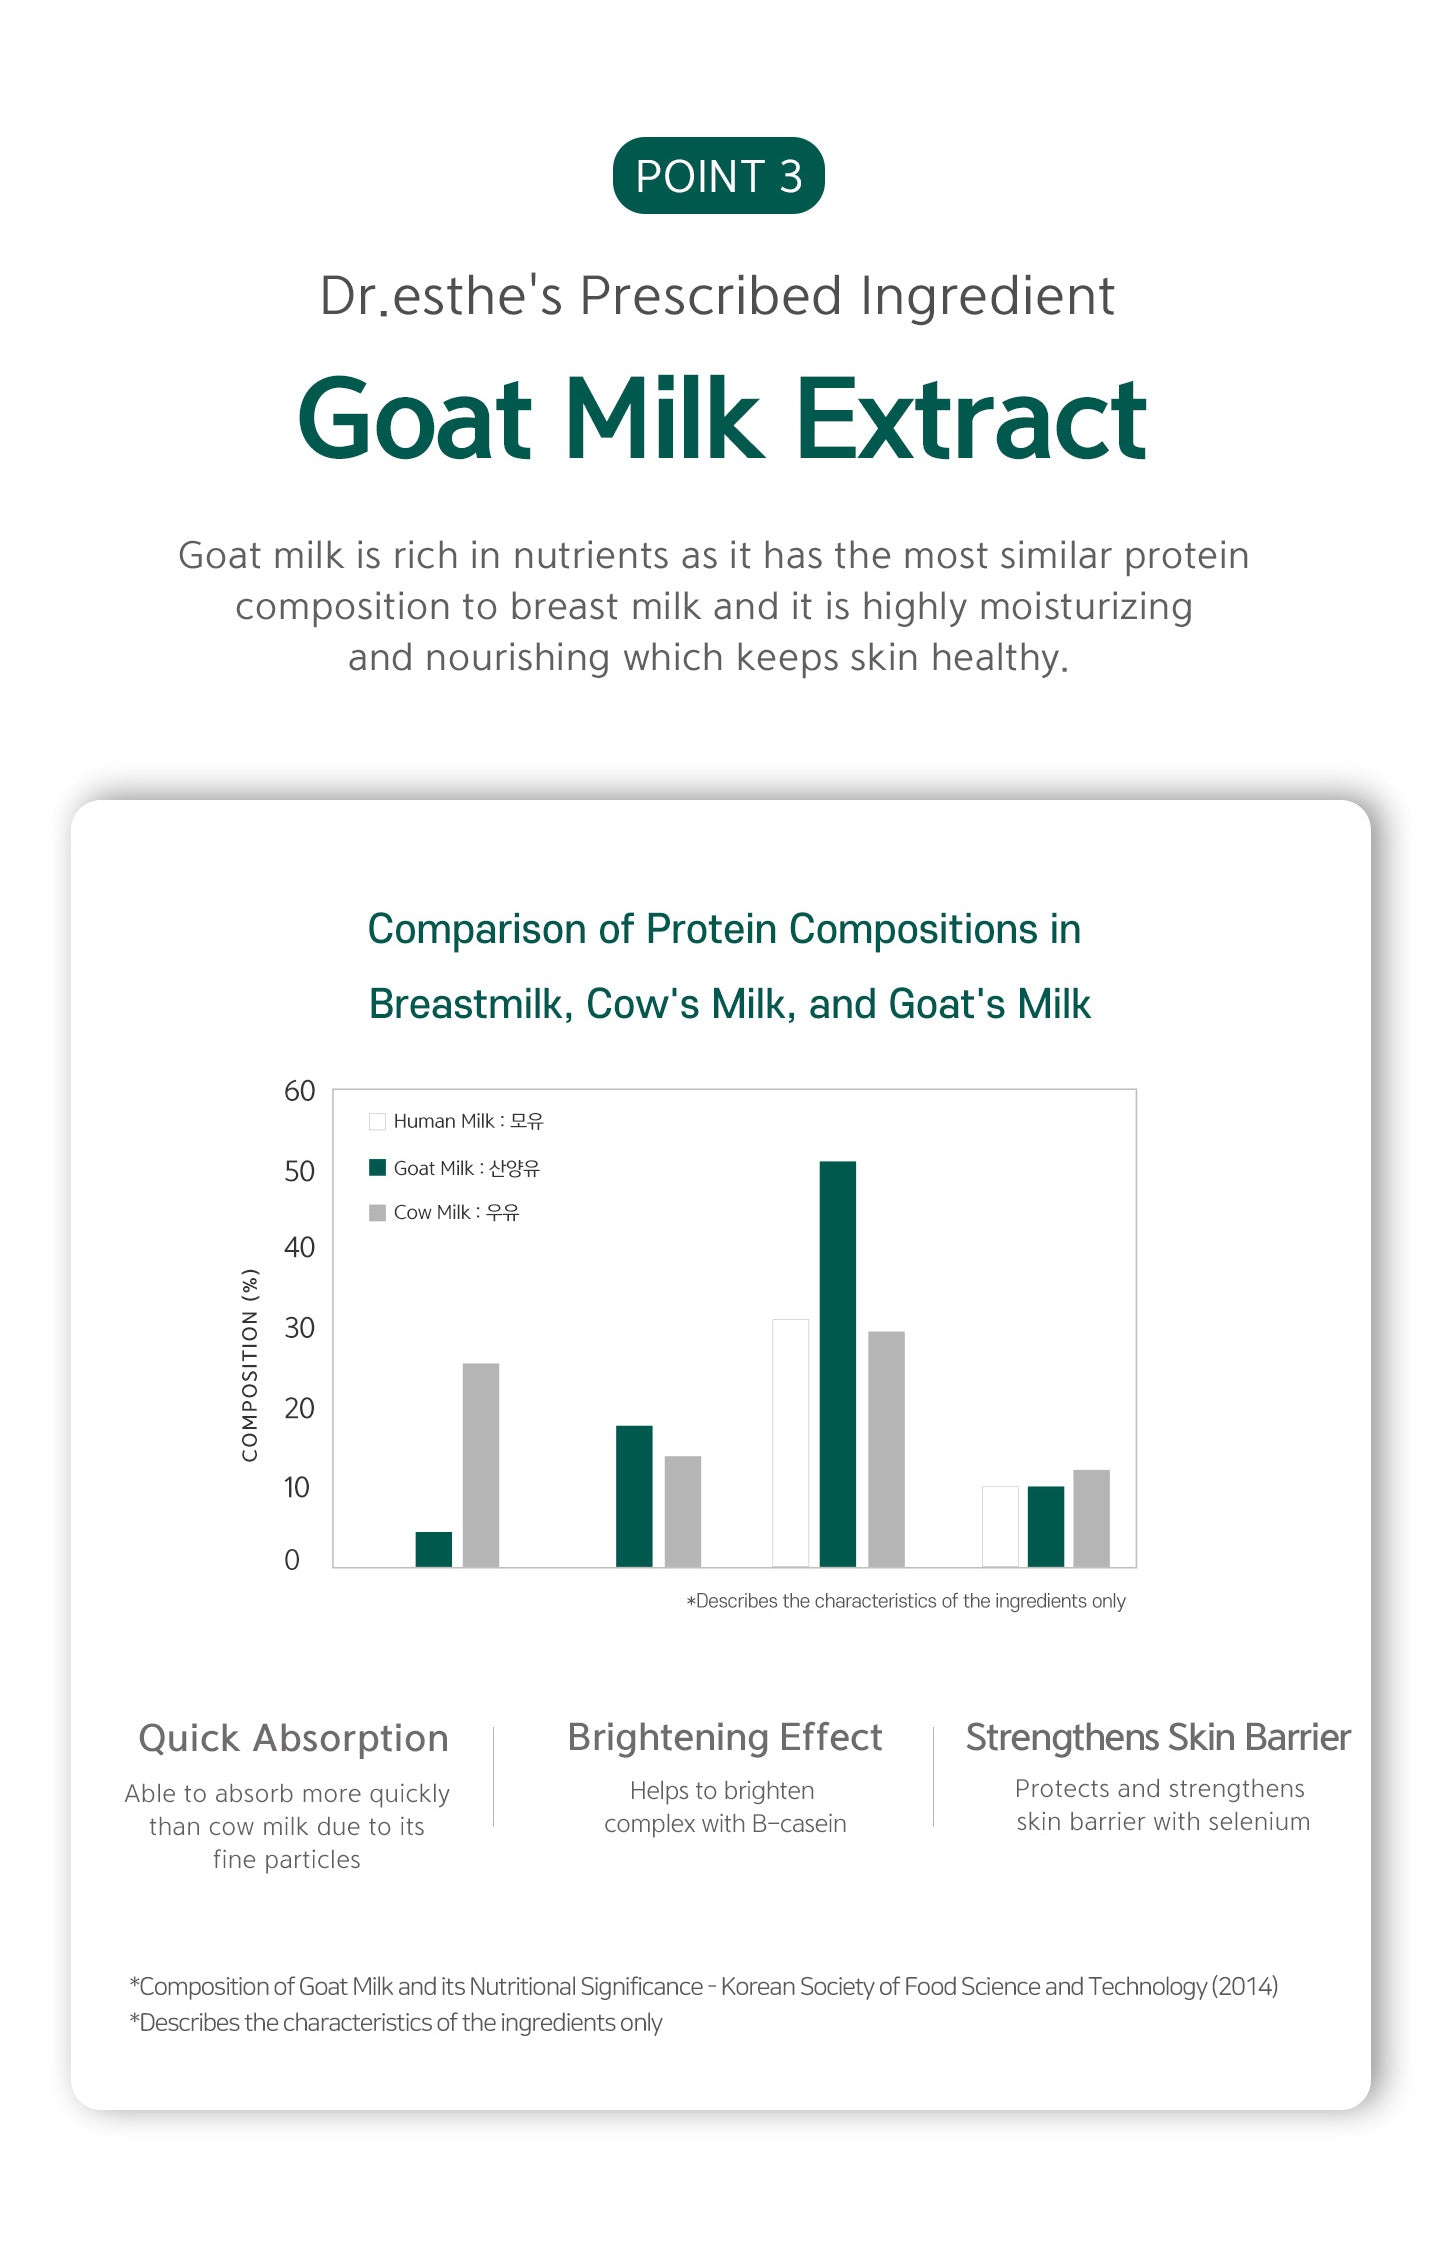 Goat milk extract is rich in nutrients as it has the most similar protein composition to breast milk and it is highly moisturizing and nourishing which keeps skin healthy. Quick absorption, brightening effect, strengthens skin barrier. 